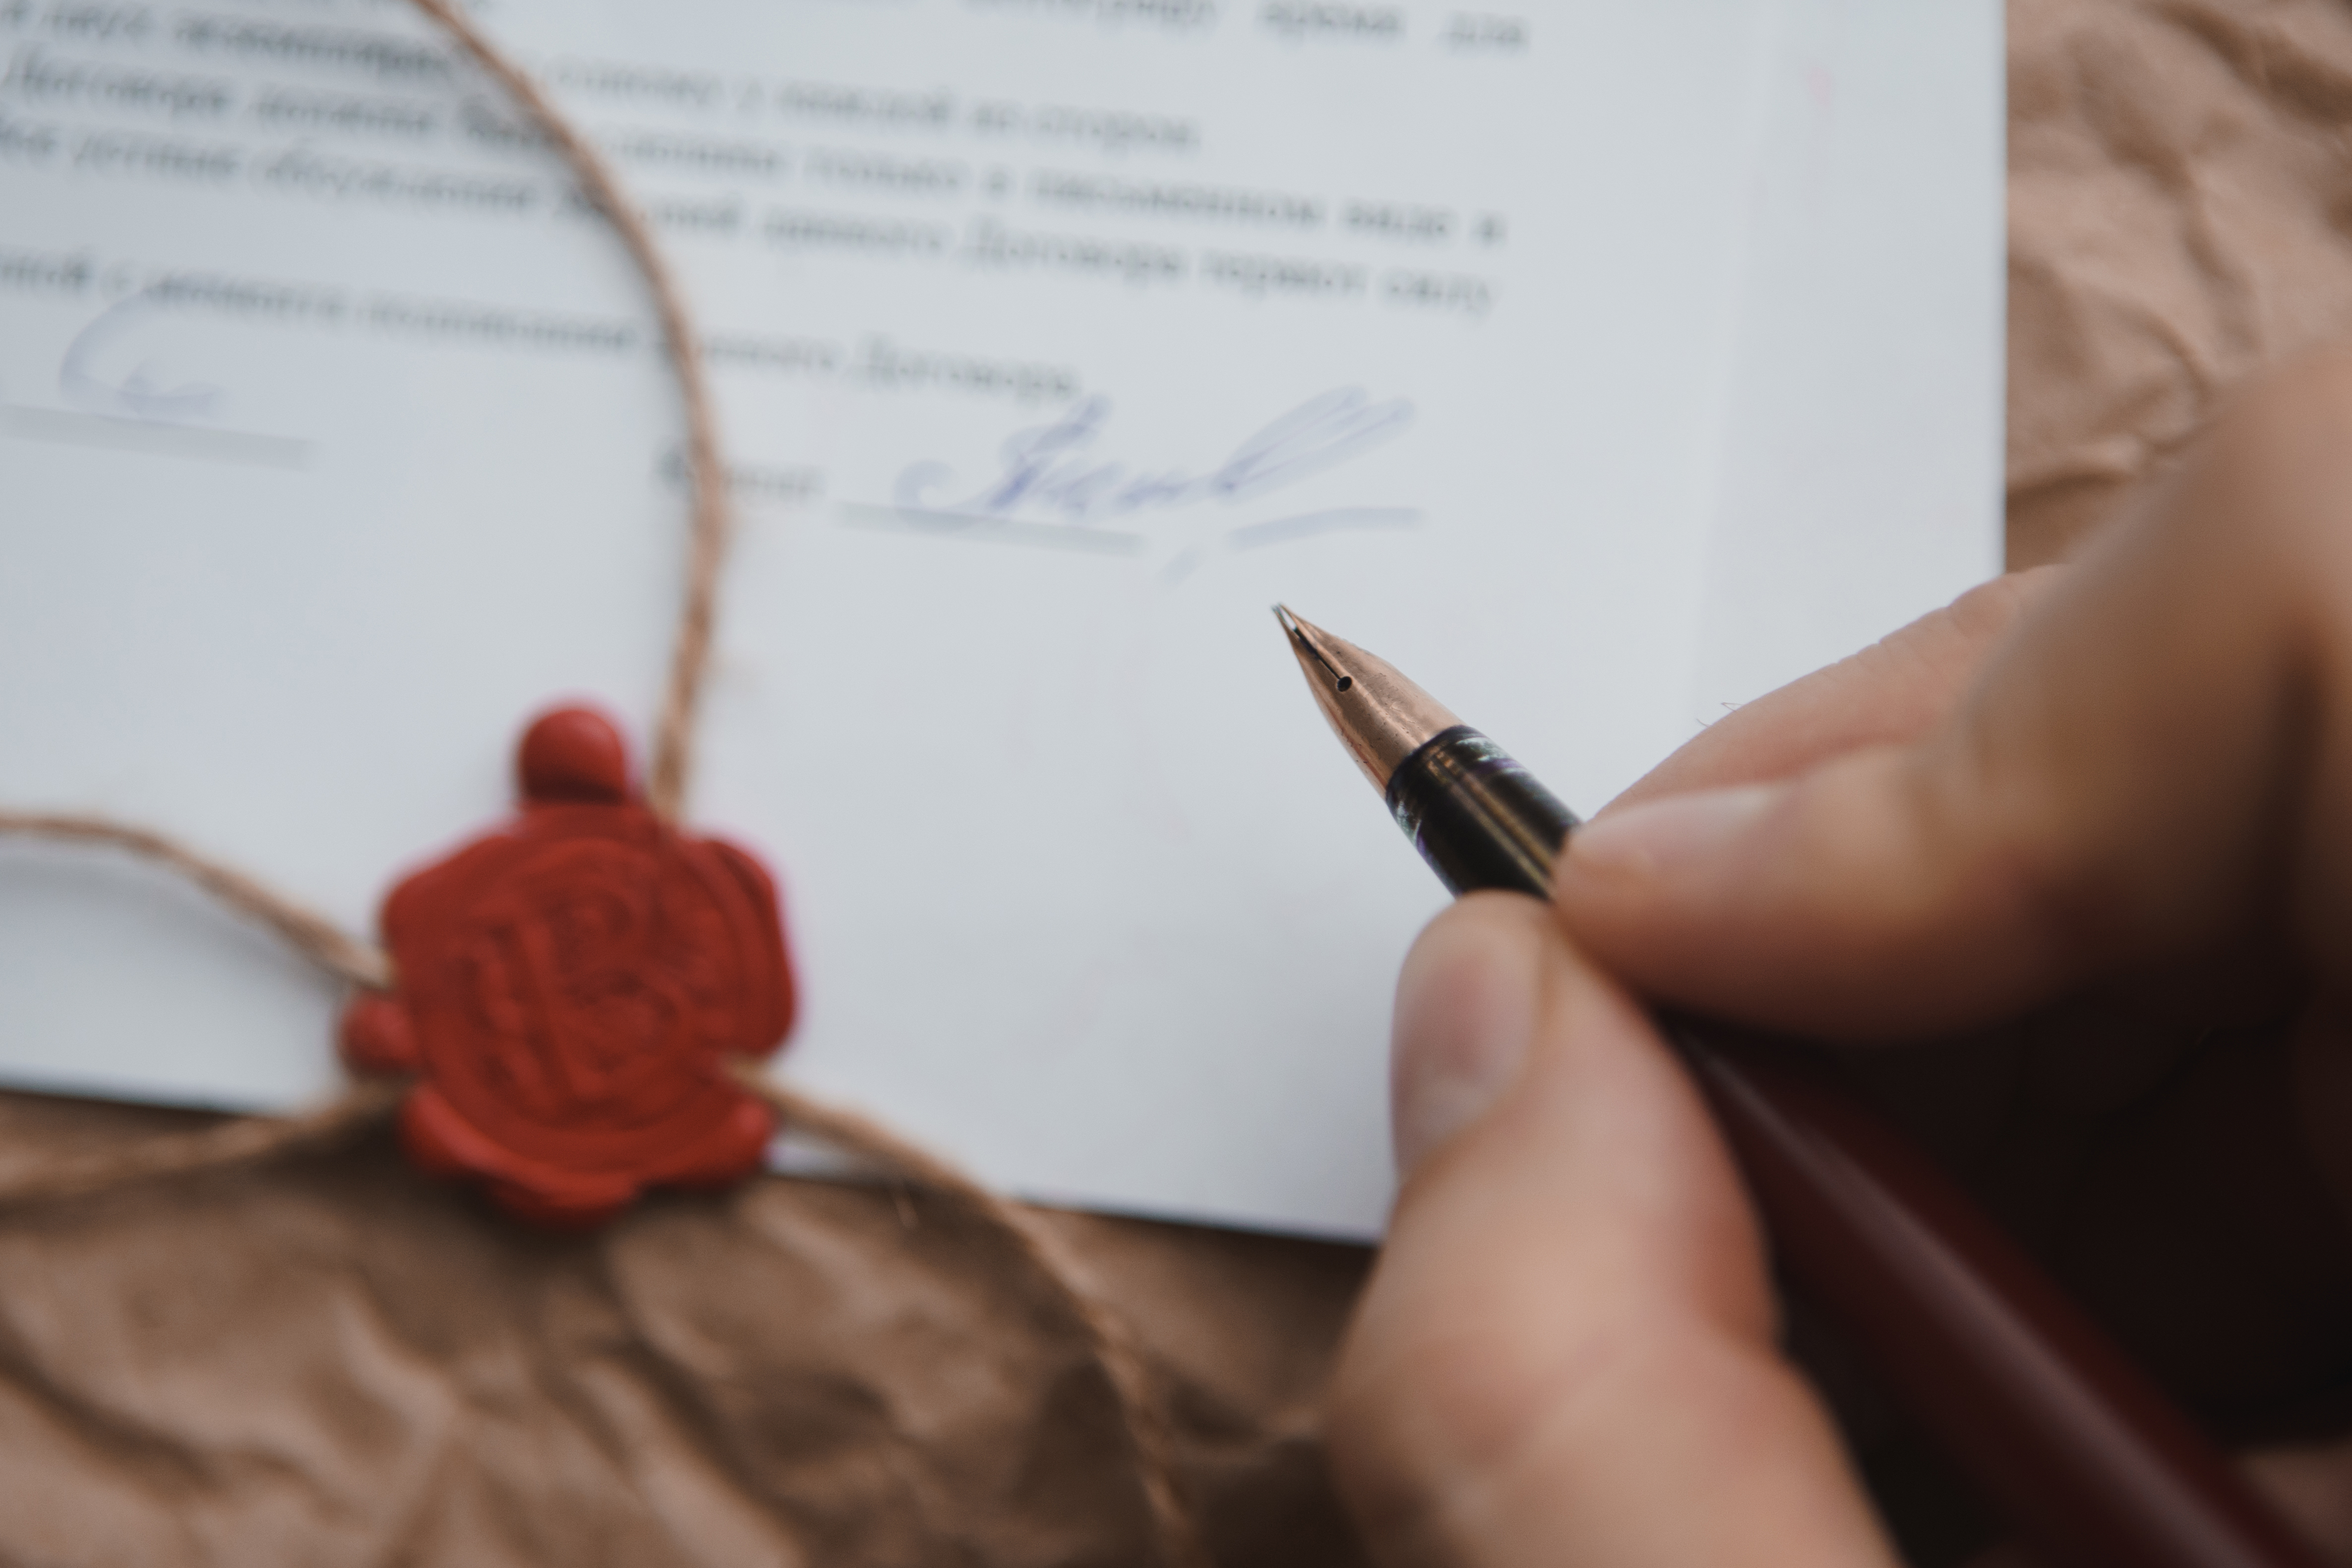 A hand signing a last will and testament | Source: Shutterstock